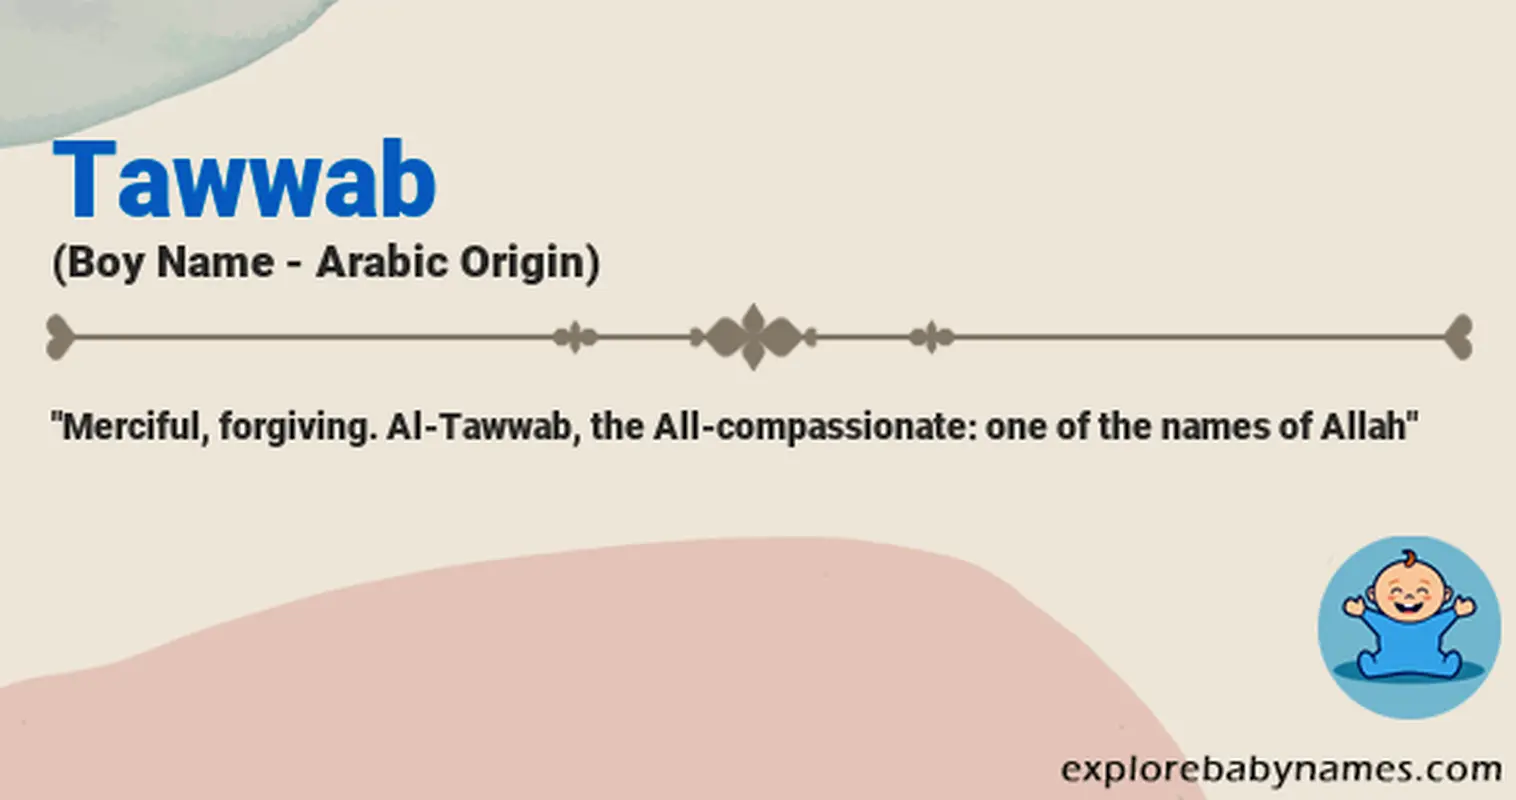 Meaning of Tawwab